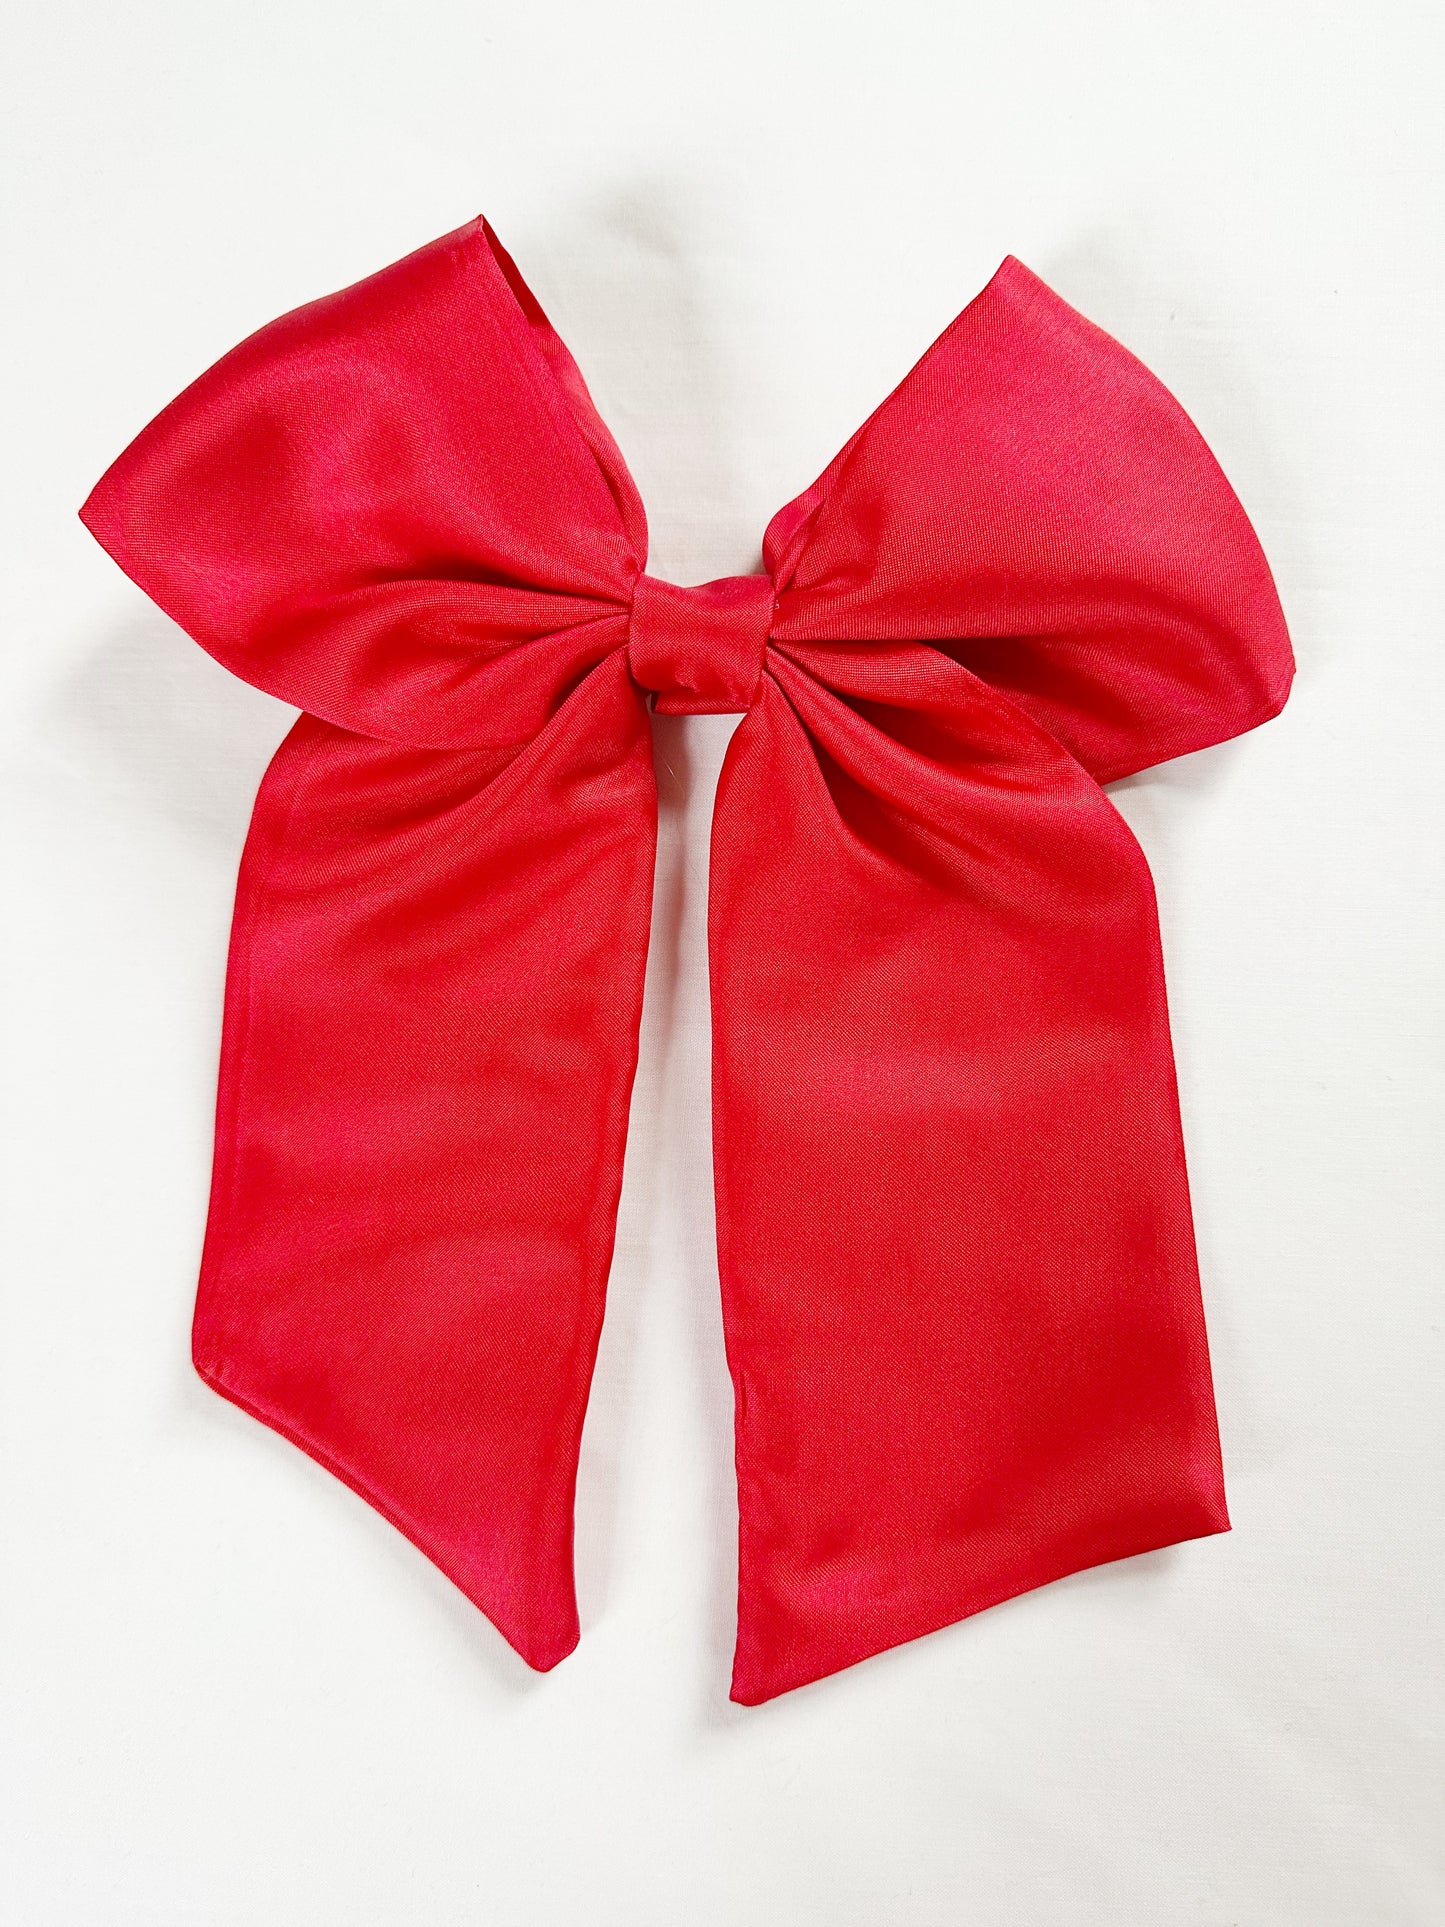 POWER Hair Bow in lipstick red silk